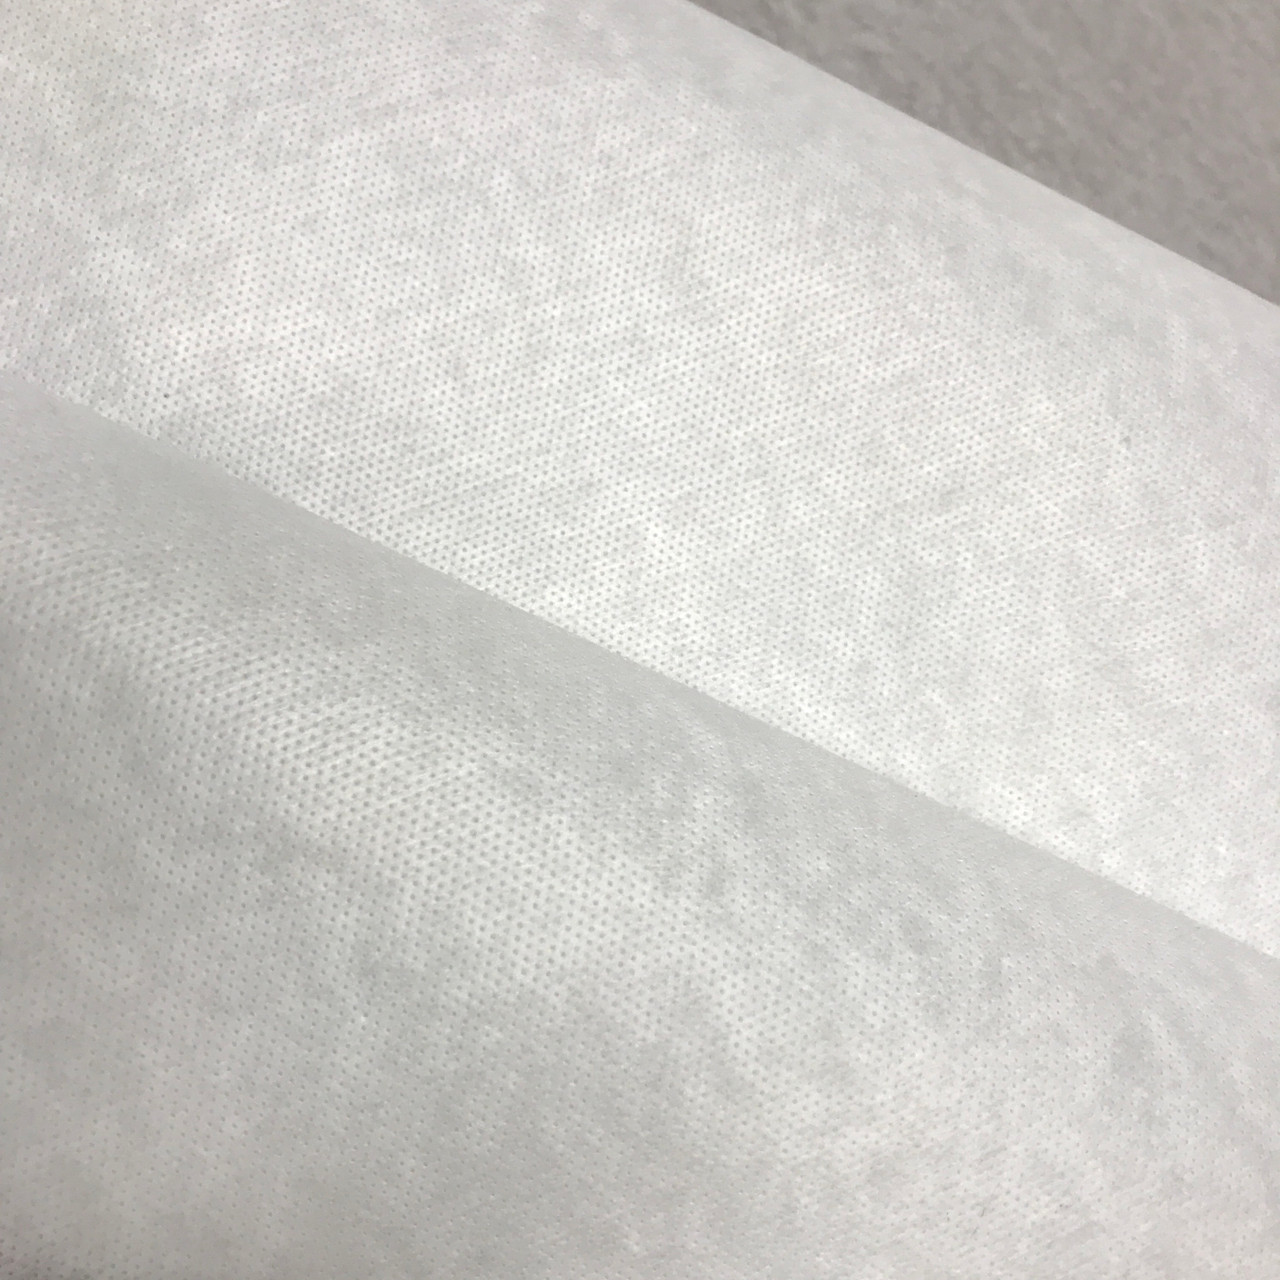 60 Lightweight Fusible Interfacing Non-woven White MADE in USA 1 Yard IF 